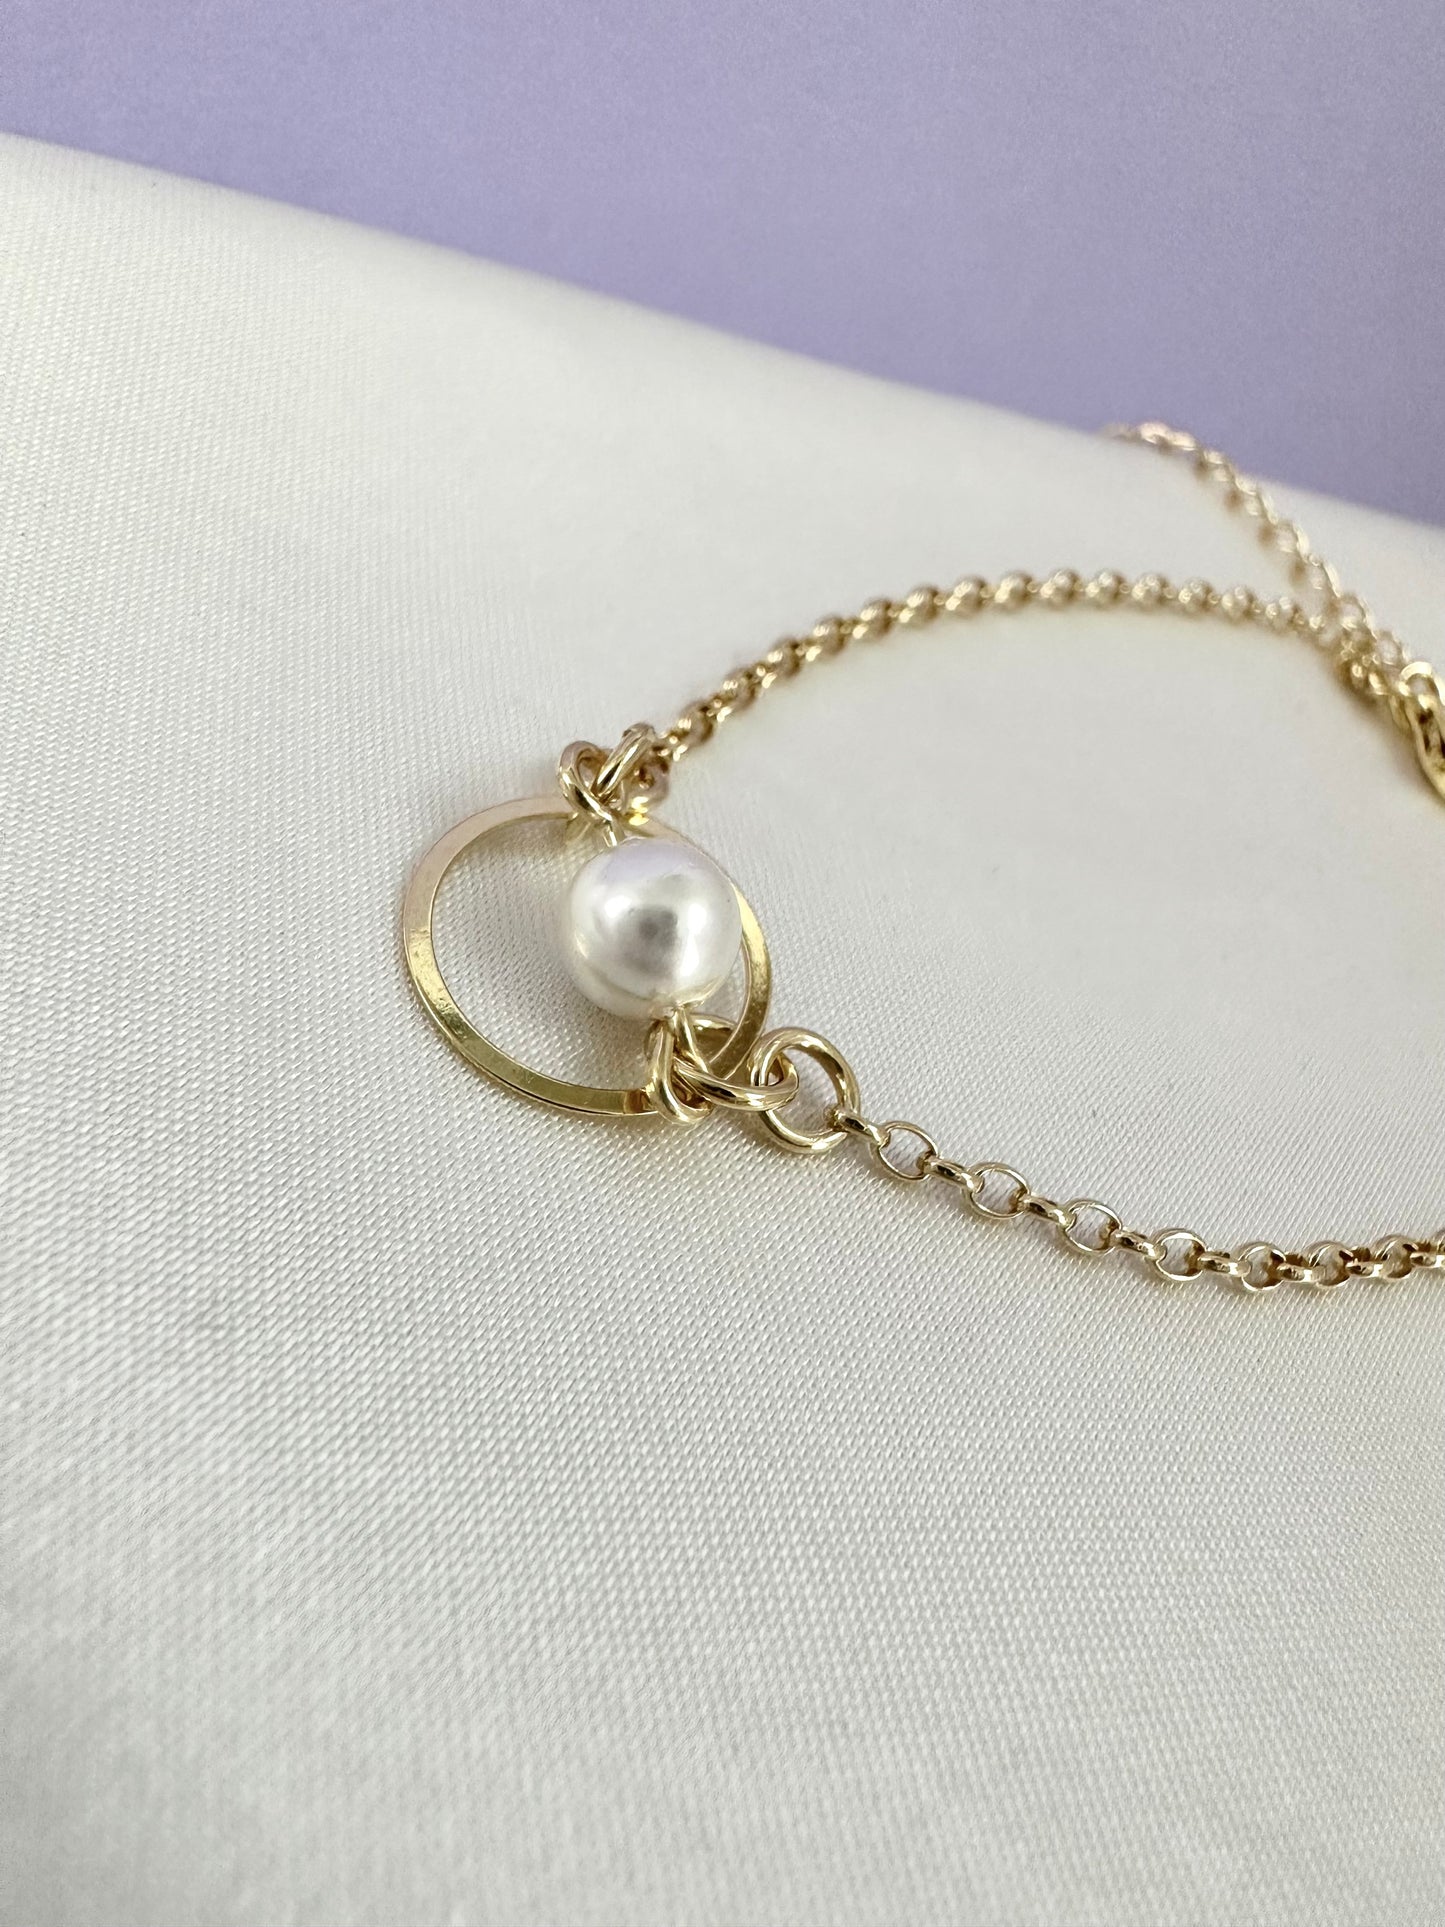 Bracelet with Pearl and ring